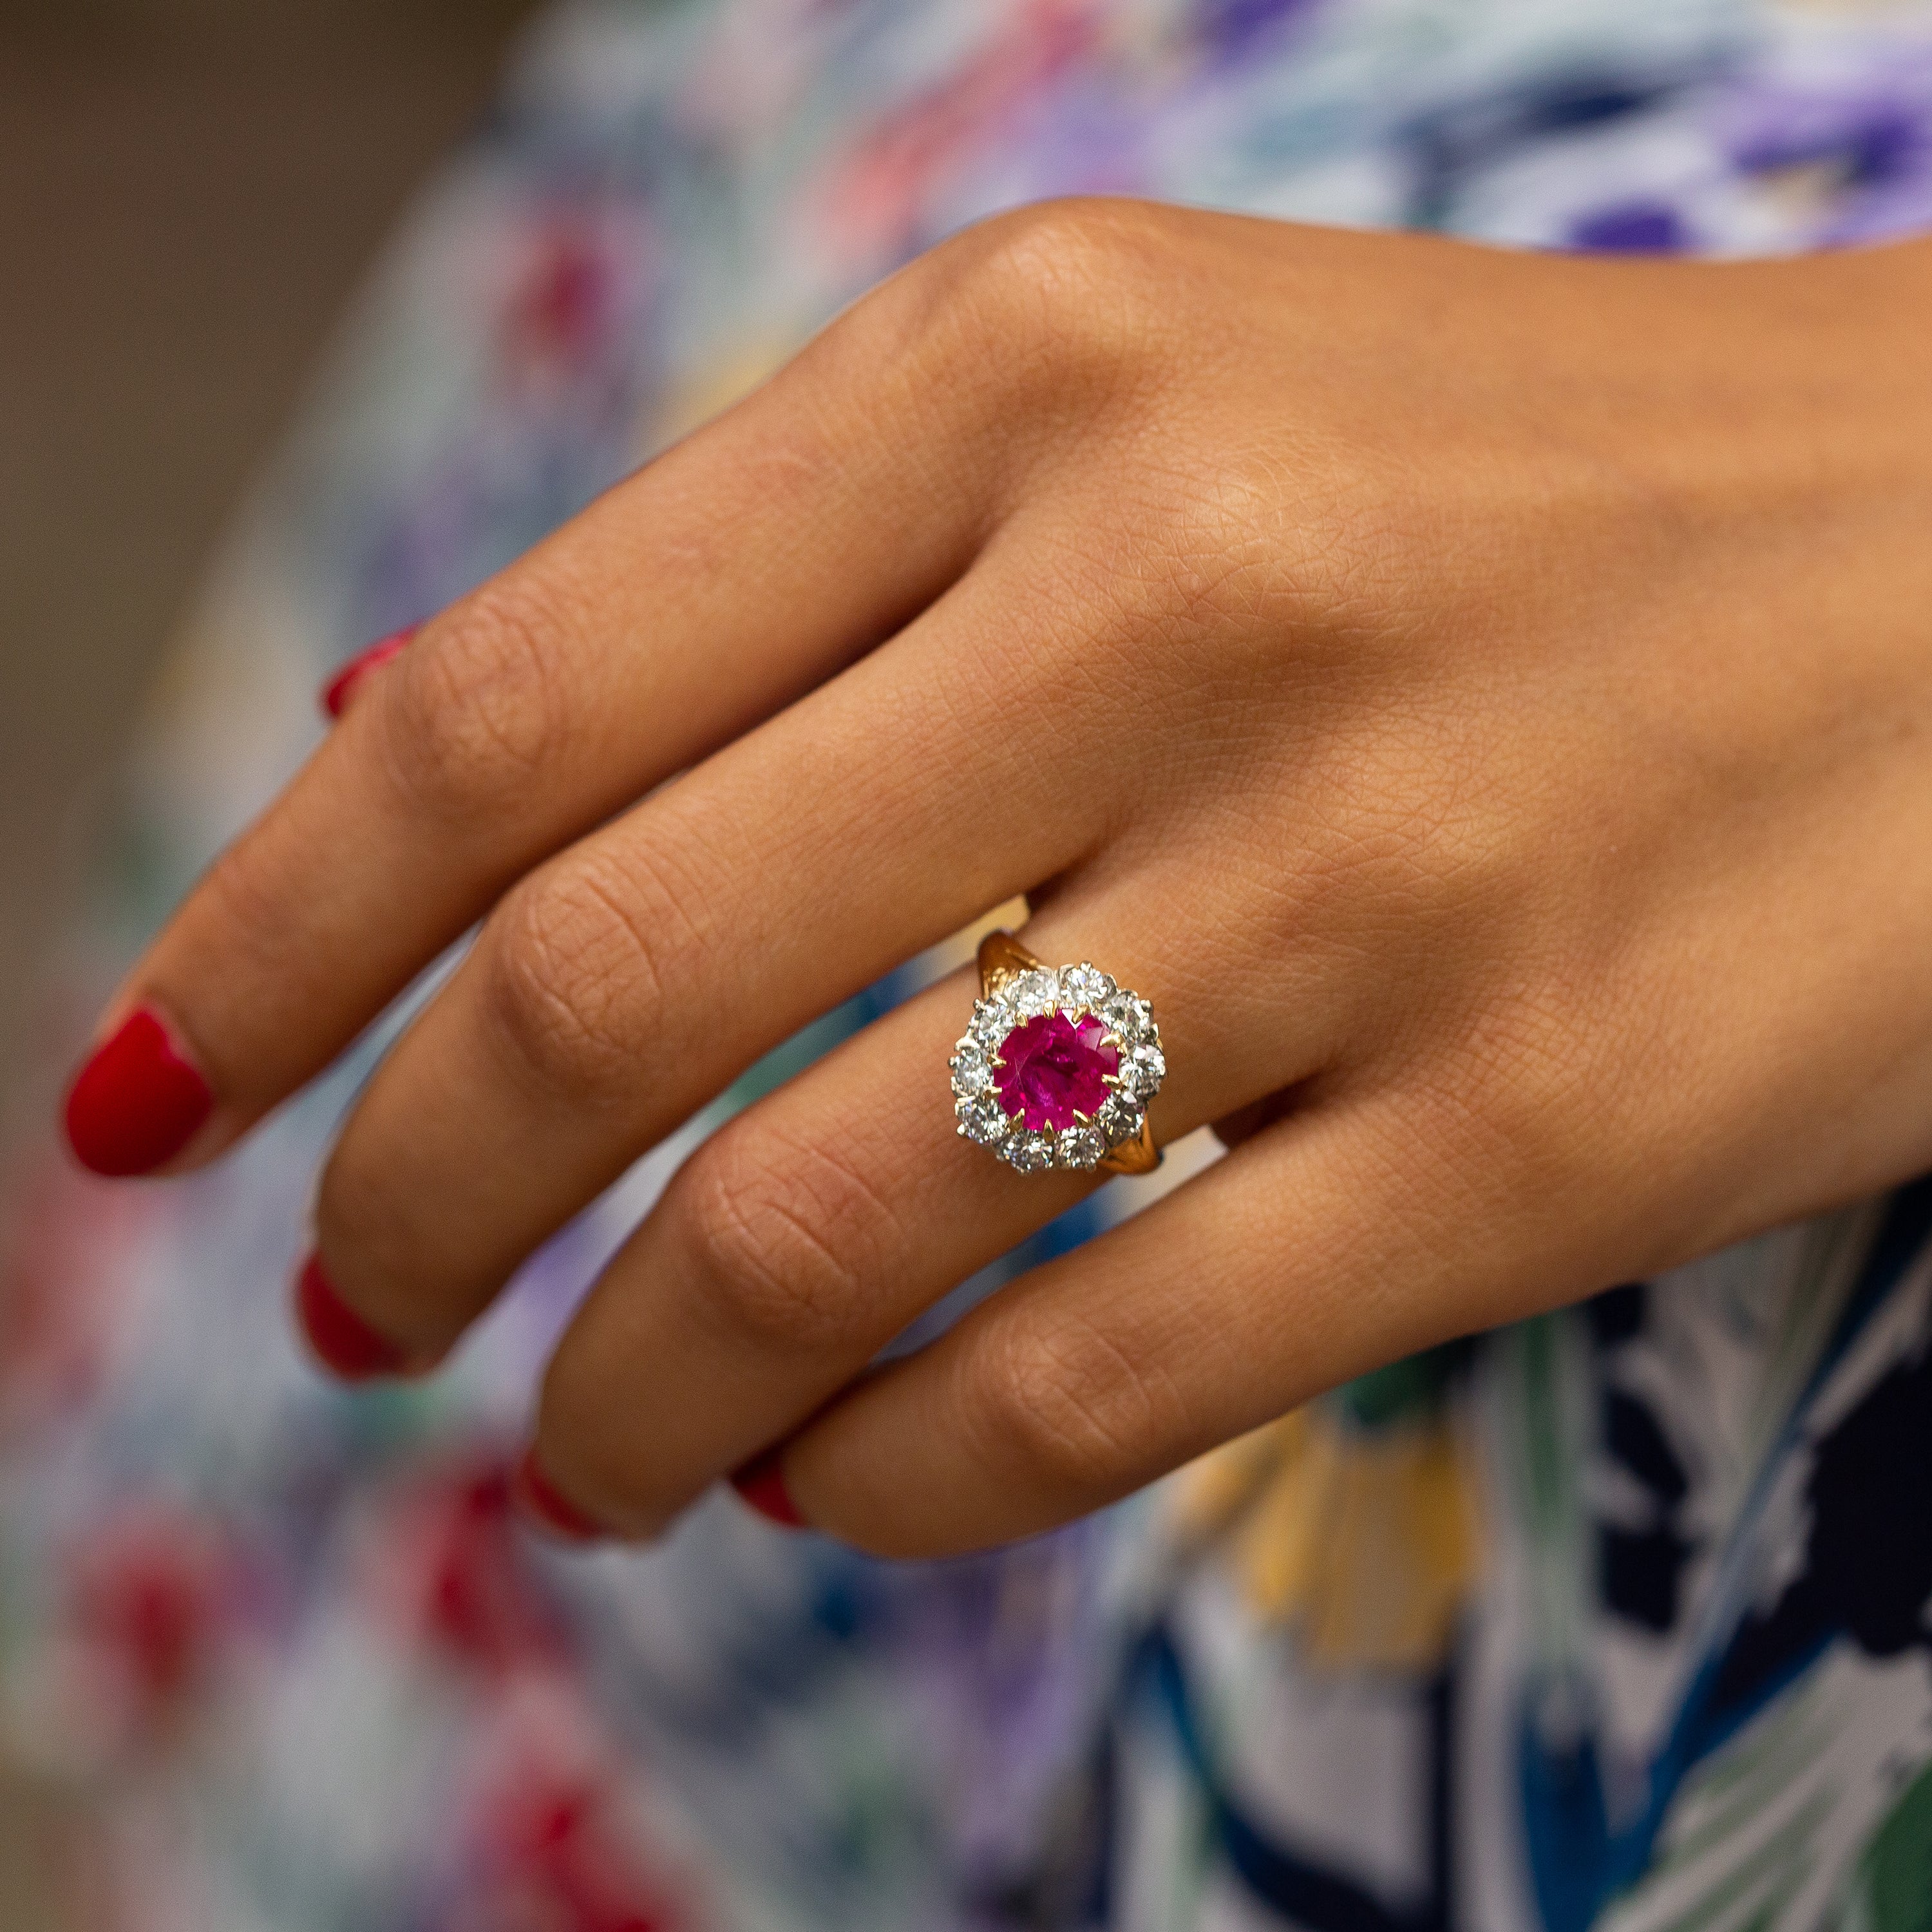 Burma Ruby and Diamond Cluster 18k Gold Ring